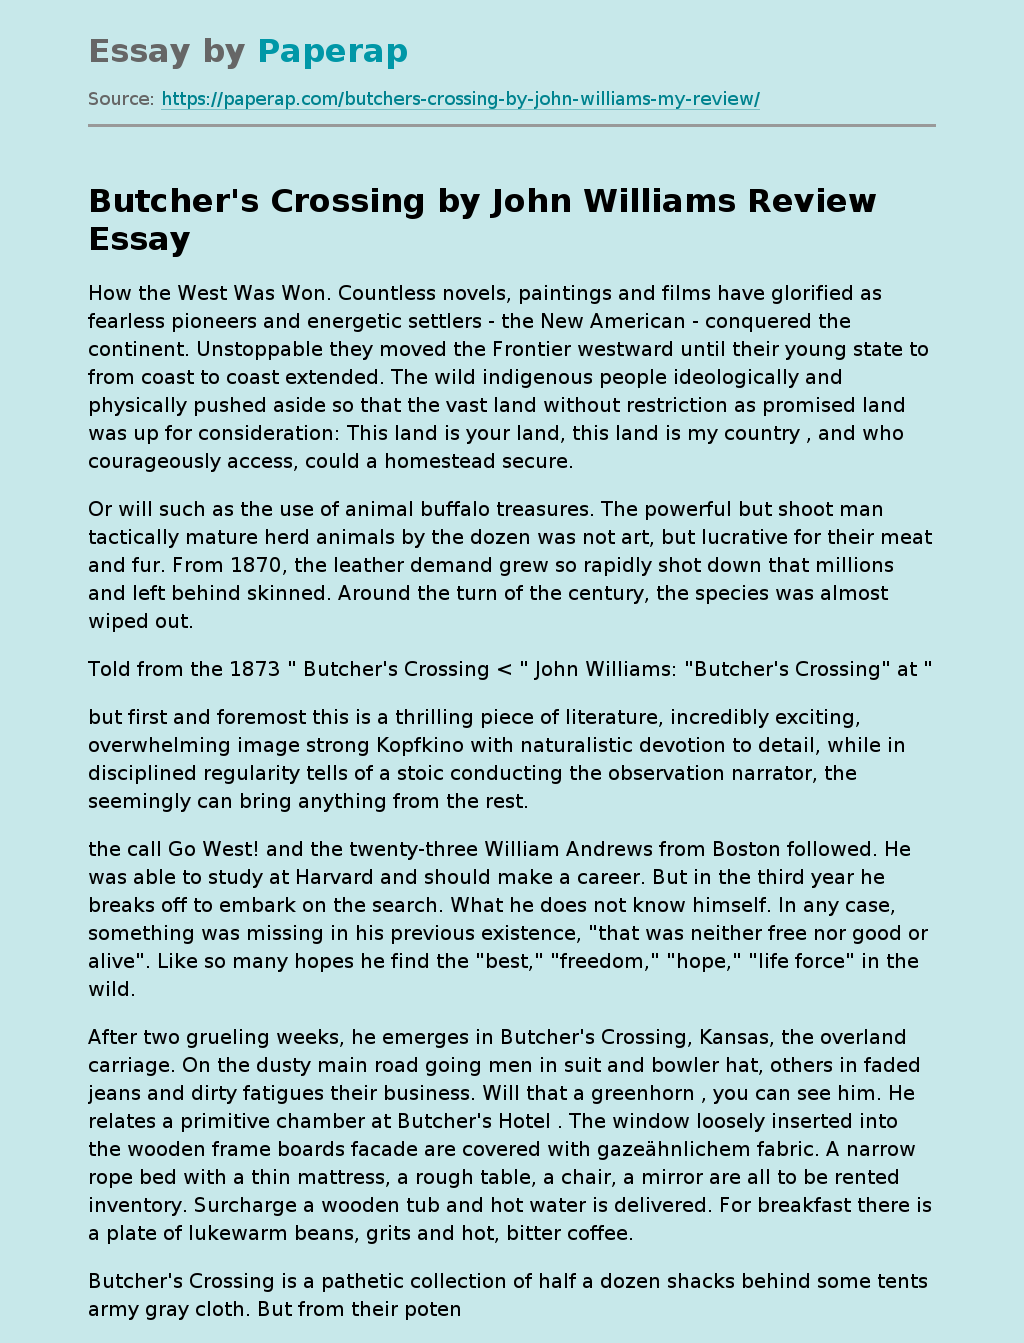 Butcher's Crossing by John Williams Review